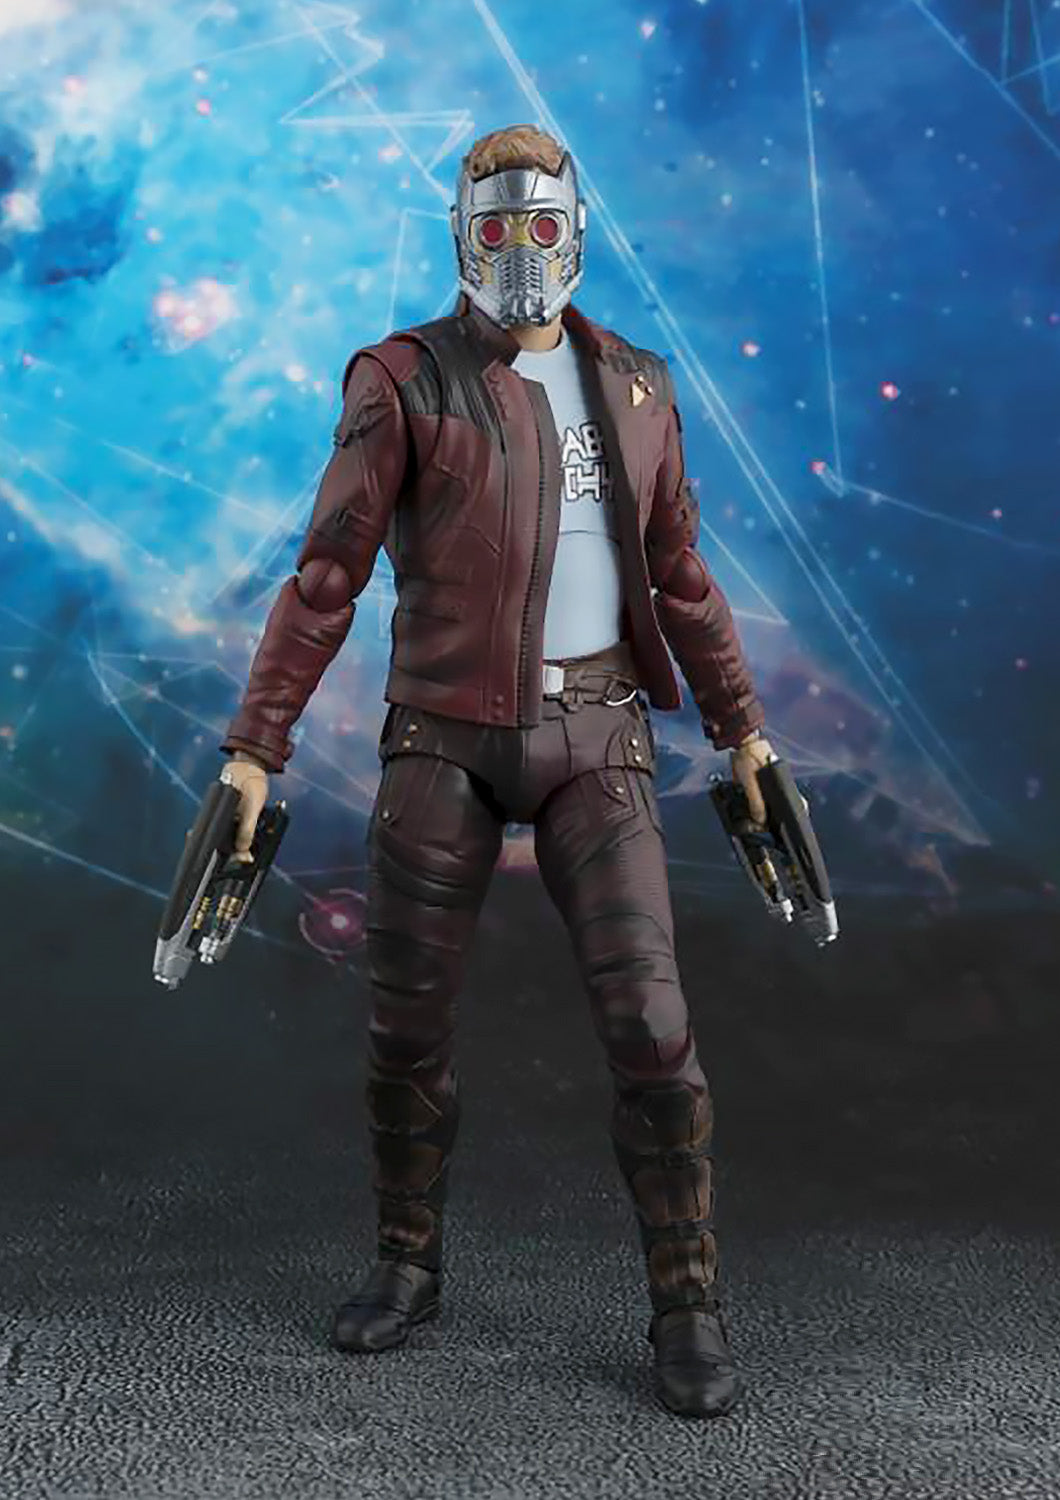 SH FIGUARTS GUARDIANS OF THE GALAXY VOL. 2 STAR-LORD & EXPLOSION SET - SHF15178 - Anotoys Collectibles